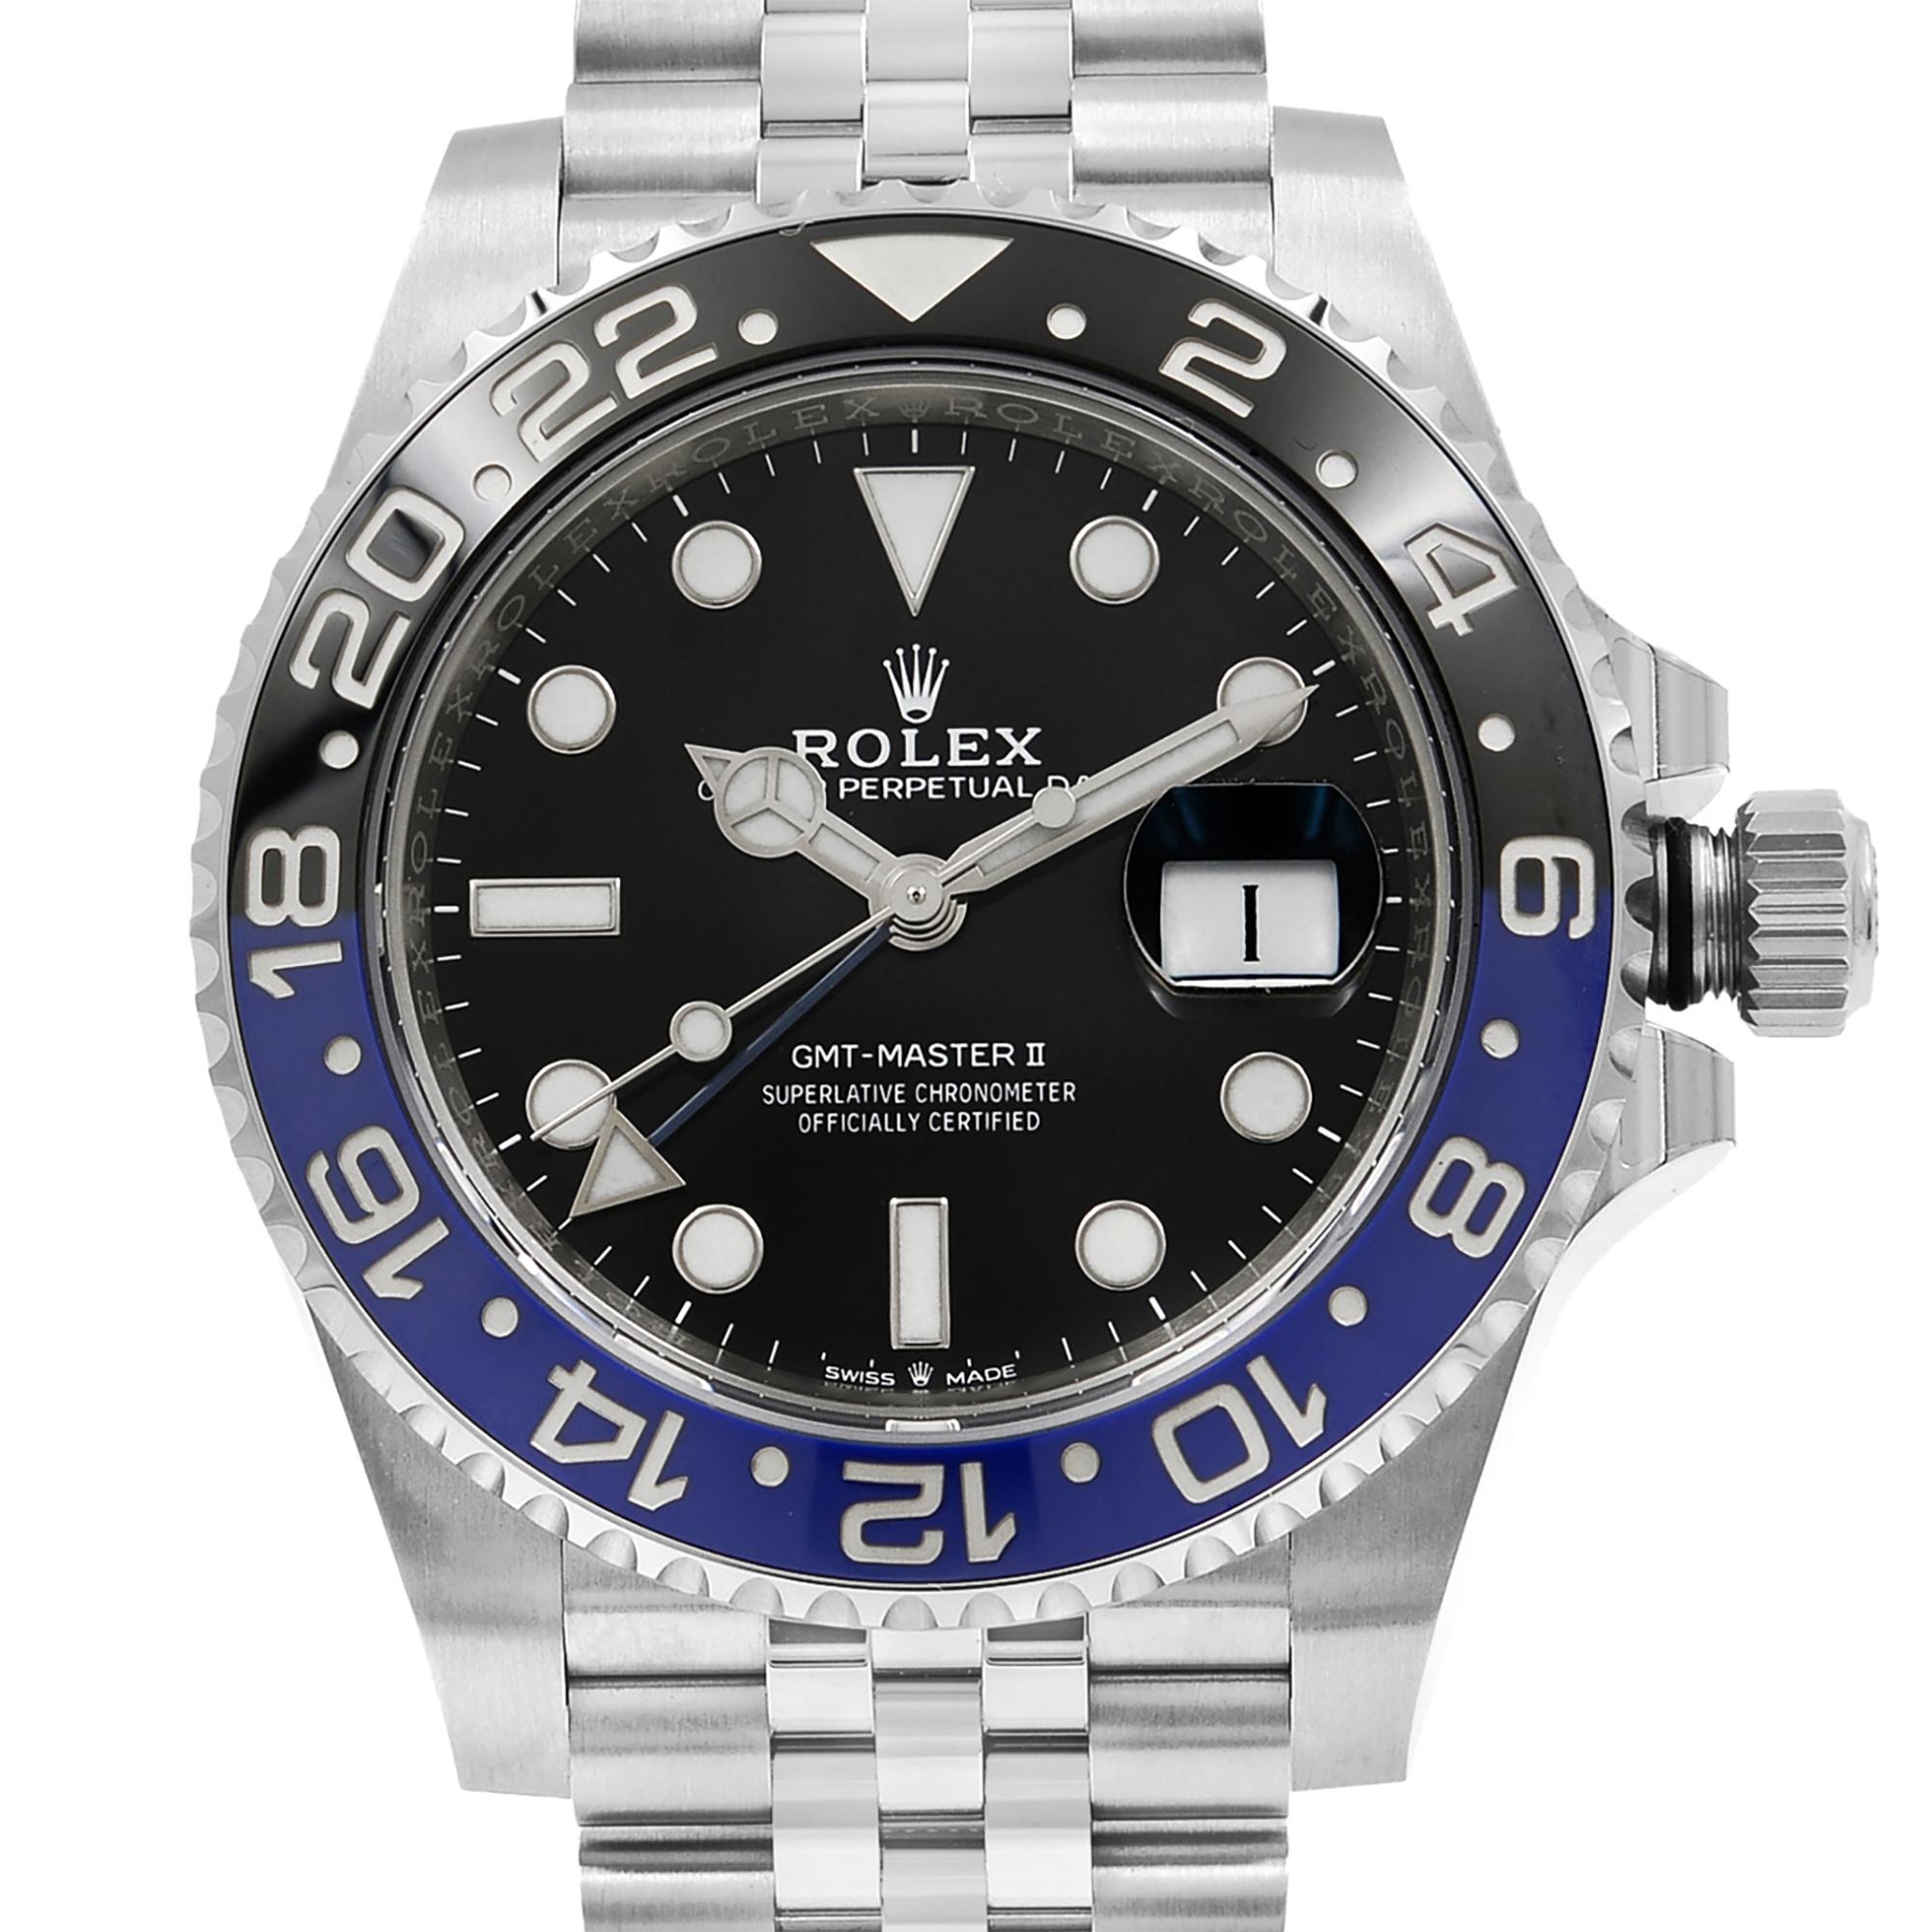 Brand new. 2023-2024 card. Box and papers are included.

Brand Information:
Brand: Rolex
Country/Region of Manufacture: Switzerland

Watch Type:
Type: Wristwatch
Department: Men
Style: Luxury

Model Information:
Model Number: 126710BLNR
Model: Rolex